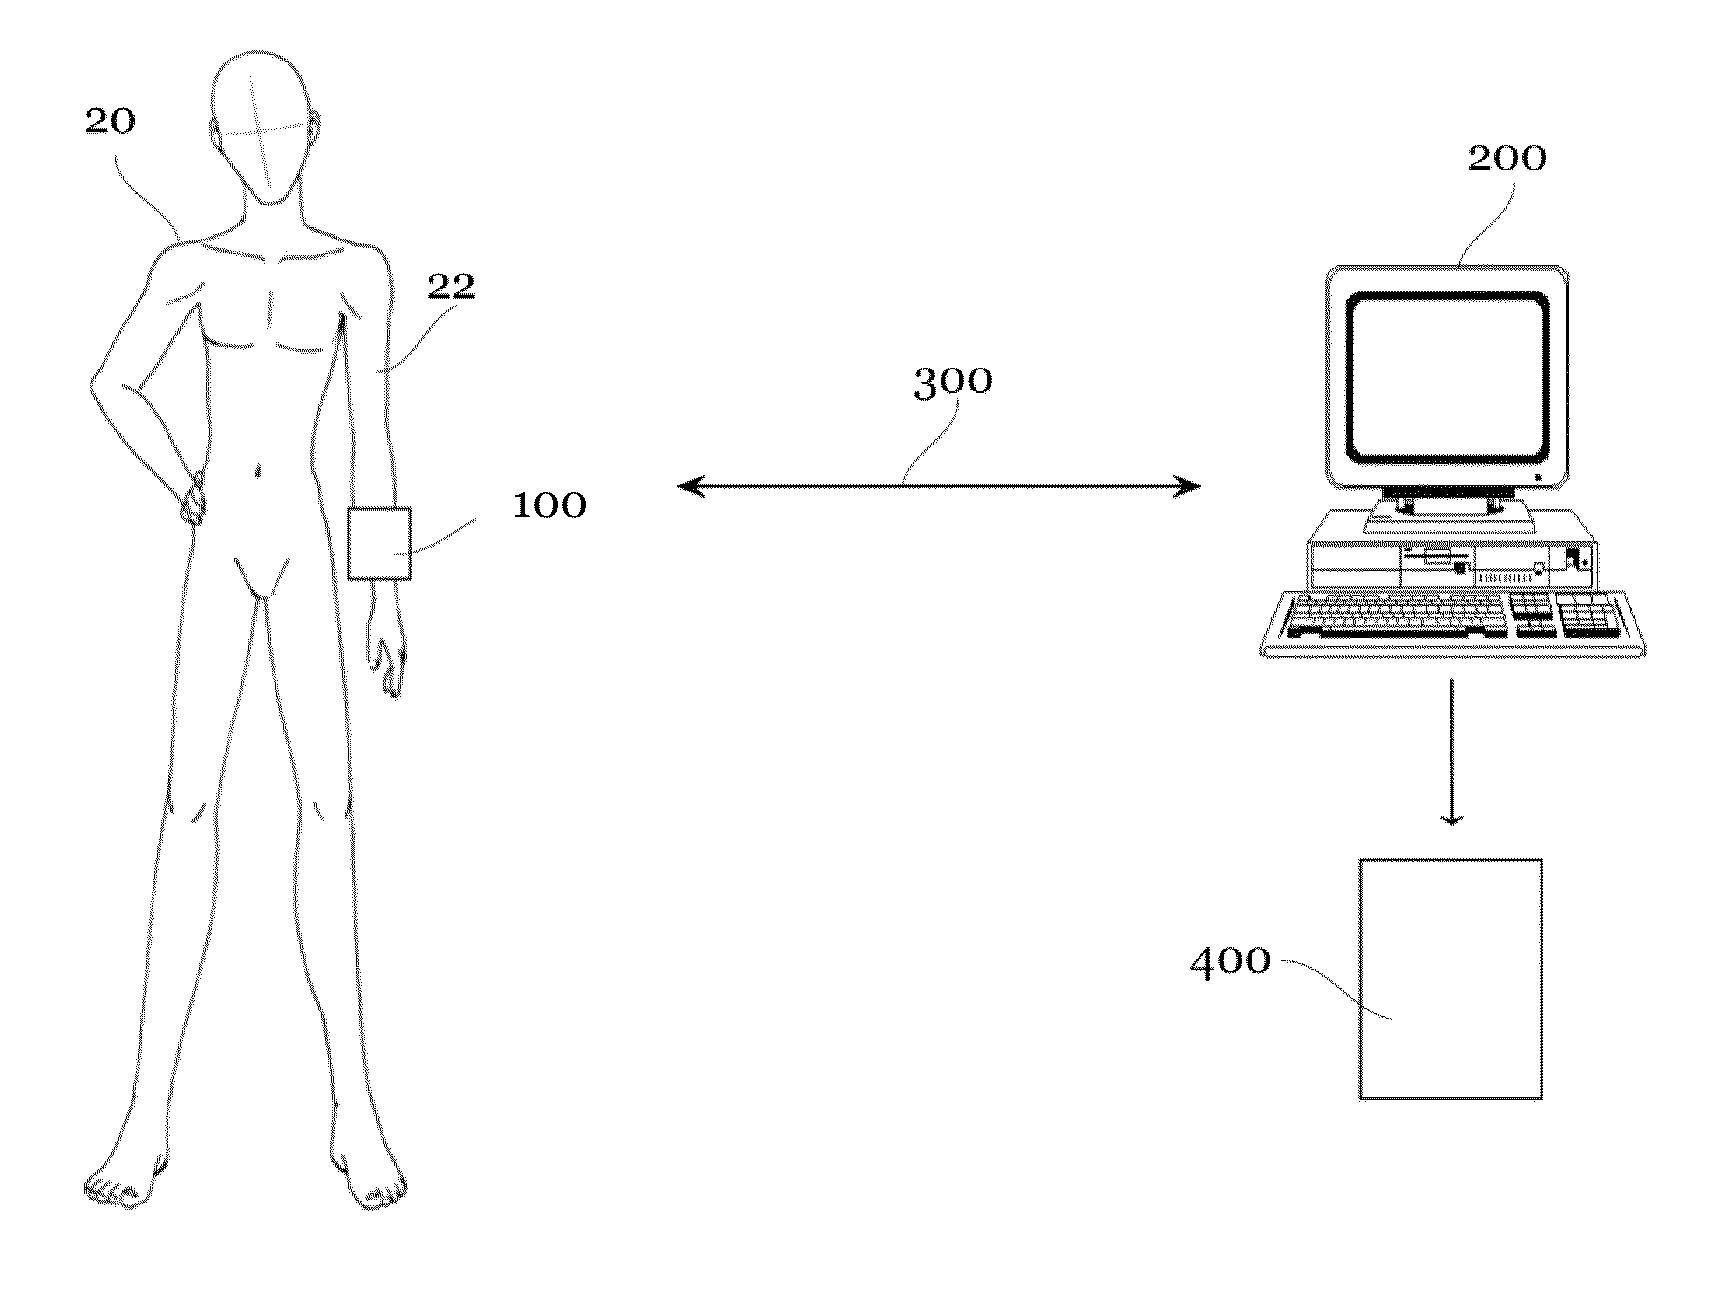 Device and method for measuring and assessing mobilities of extremities and of body parts